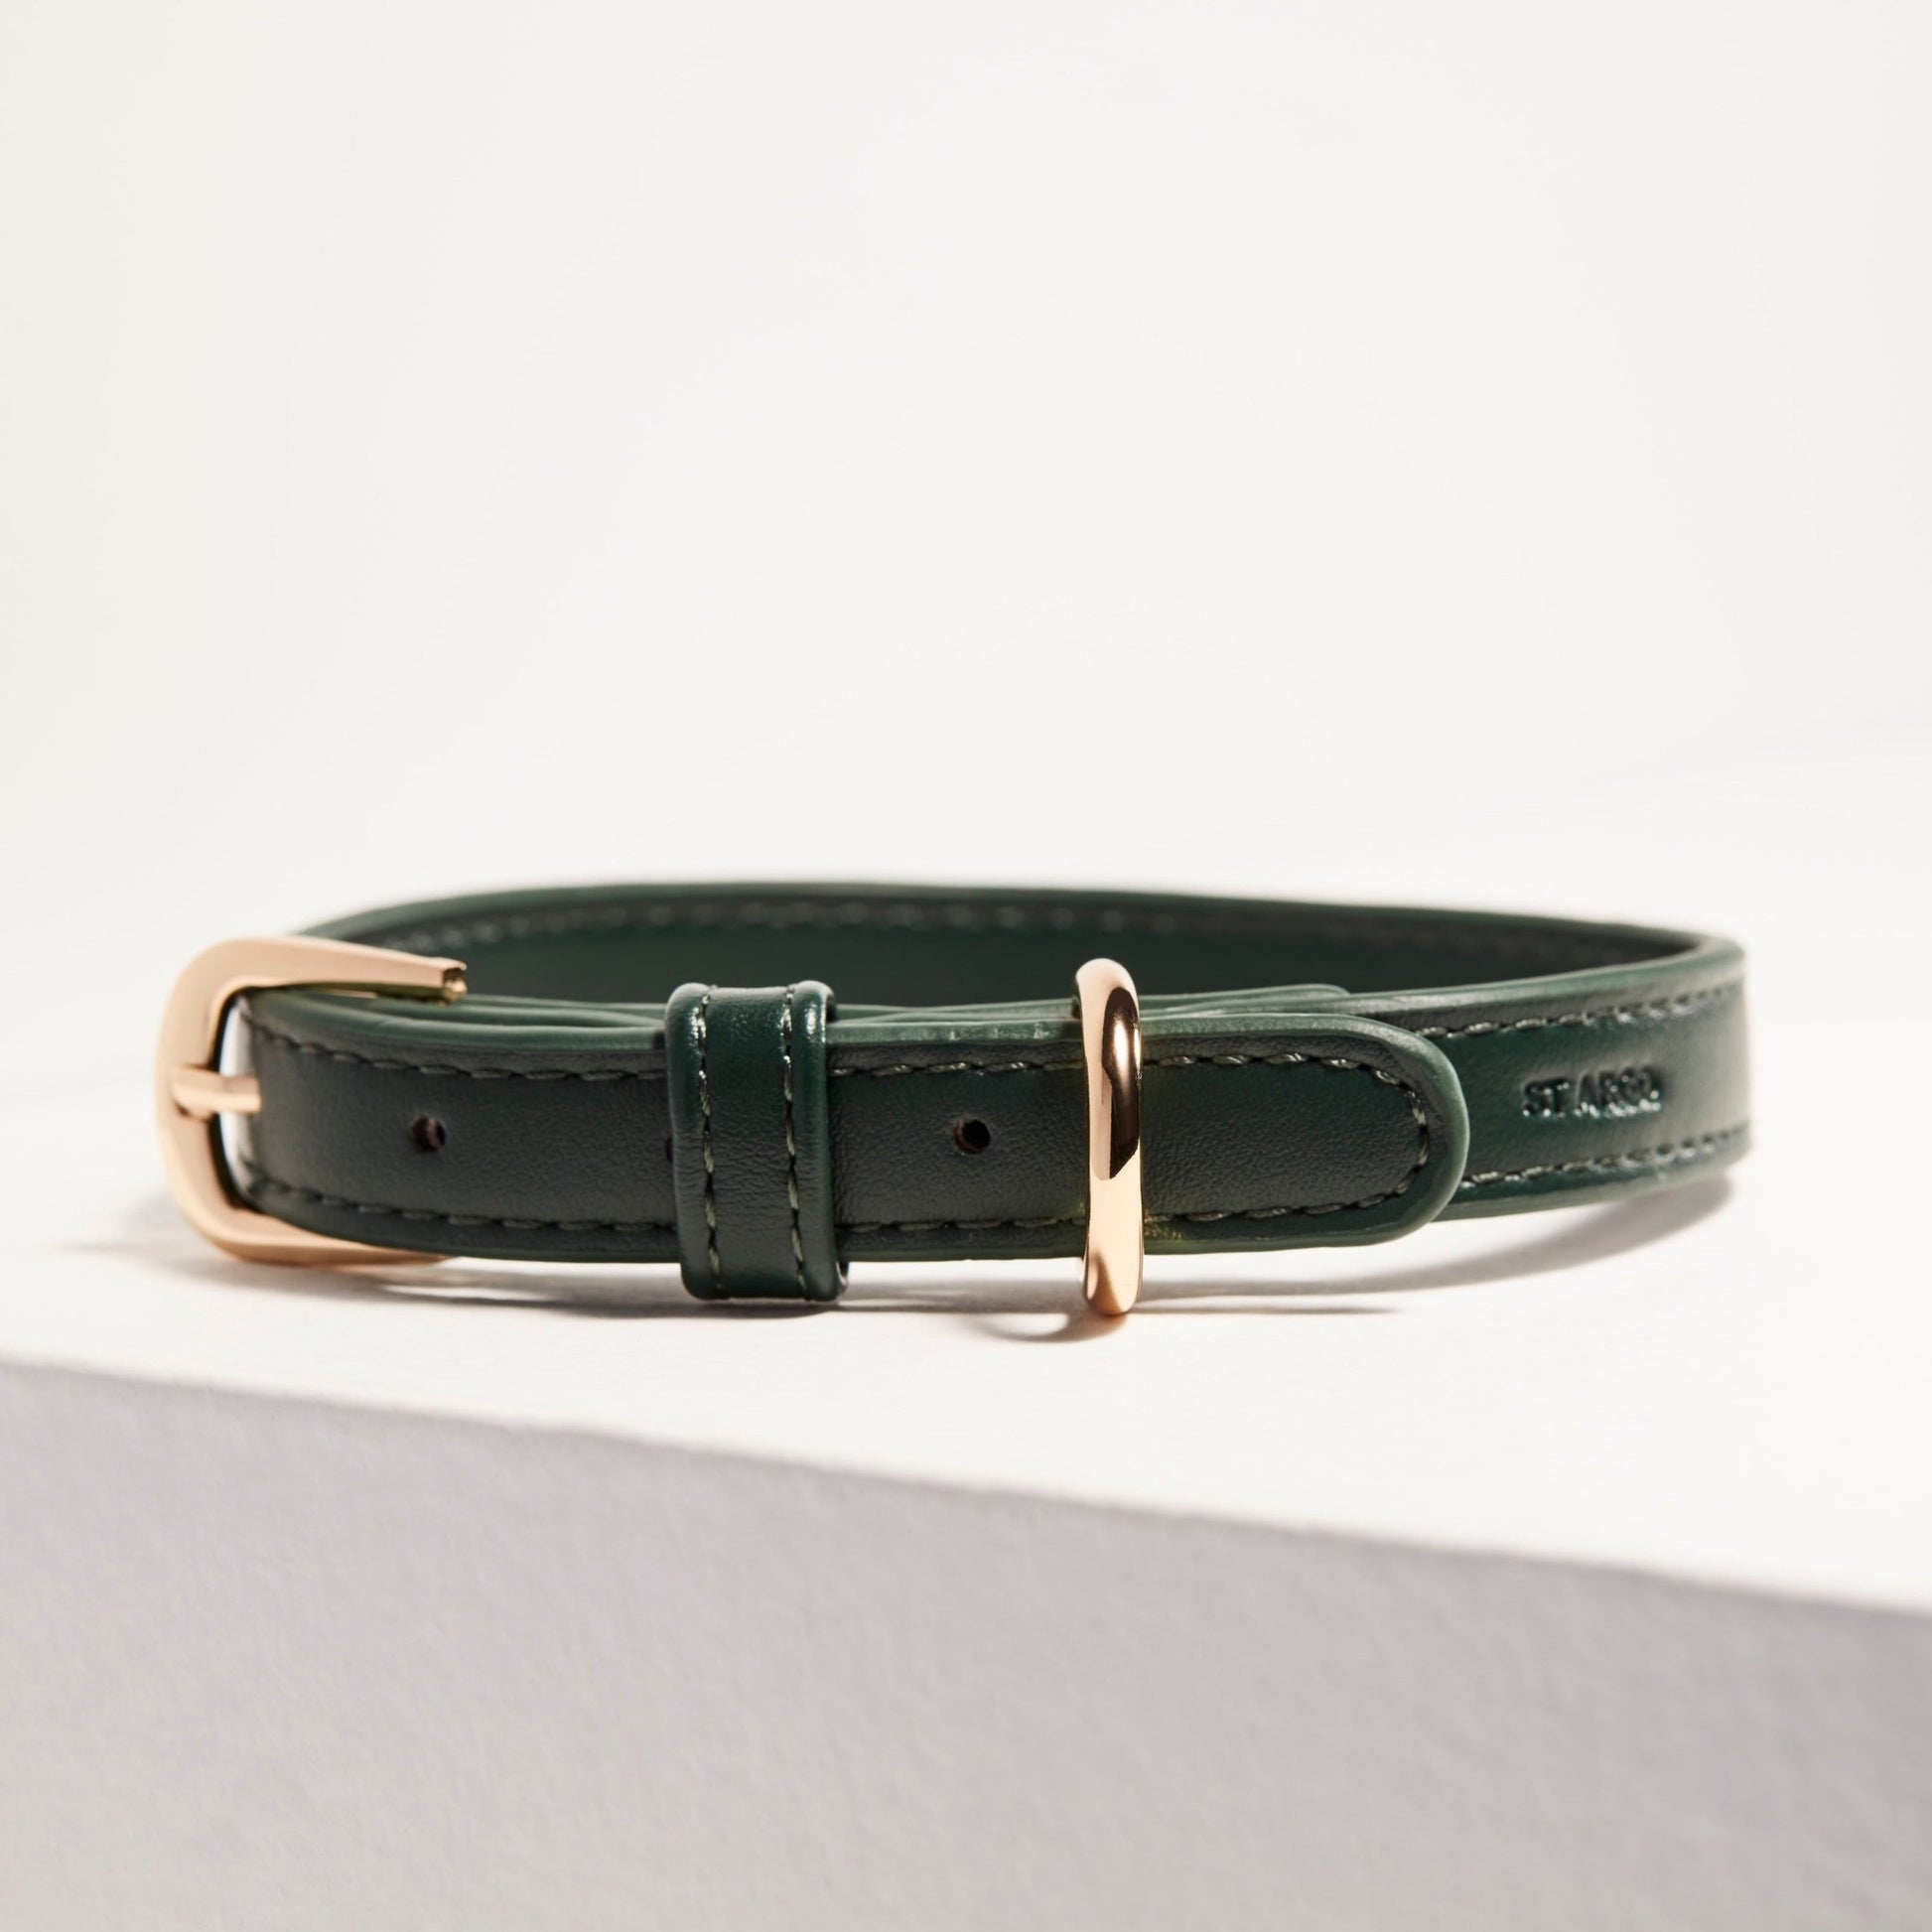 Bottle green vegan leather dog collar by ST ARGO with high quality durable custom gold hardware